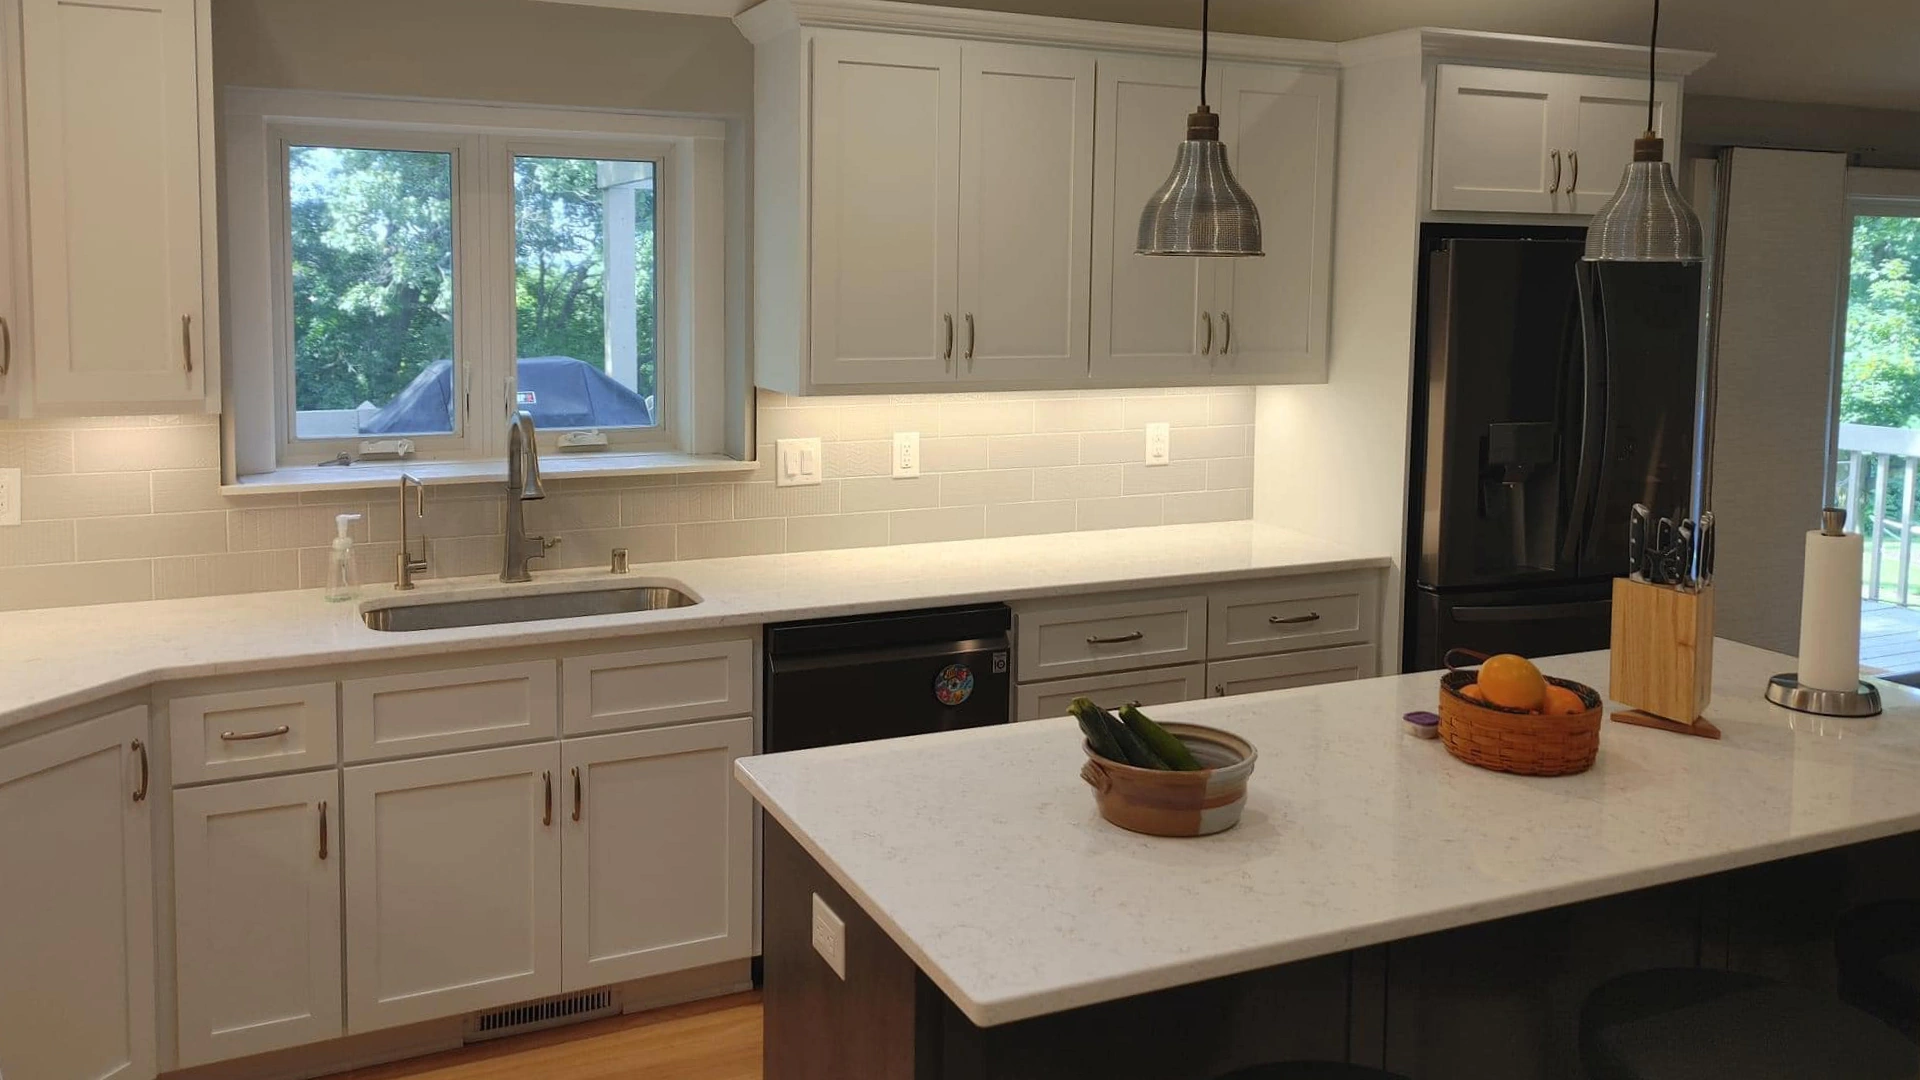 newly renovated kitchen of residential house with white cabinets and hanging lights at kitchen countertop